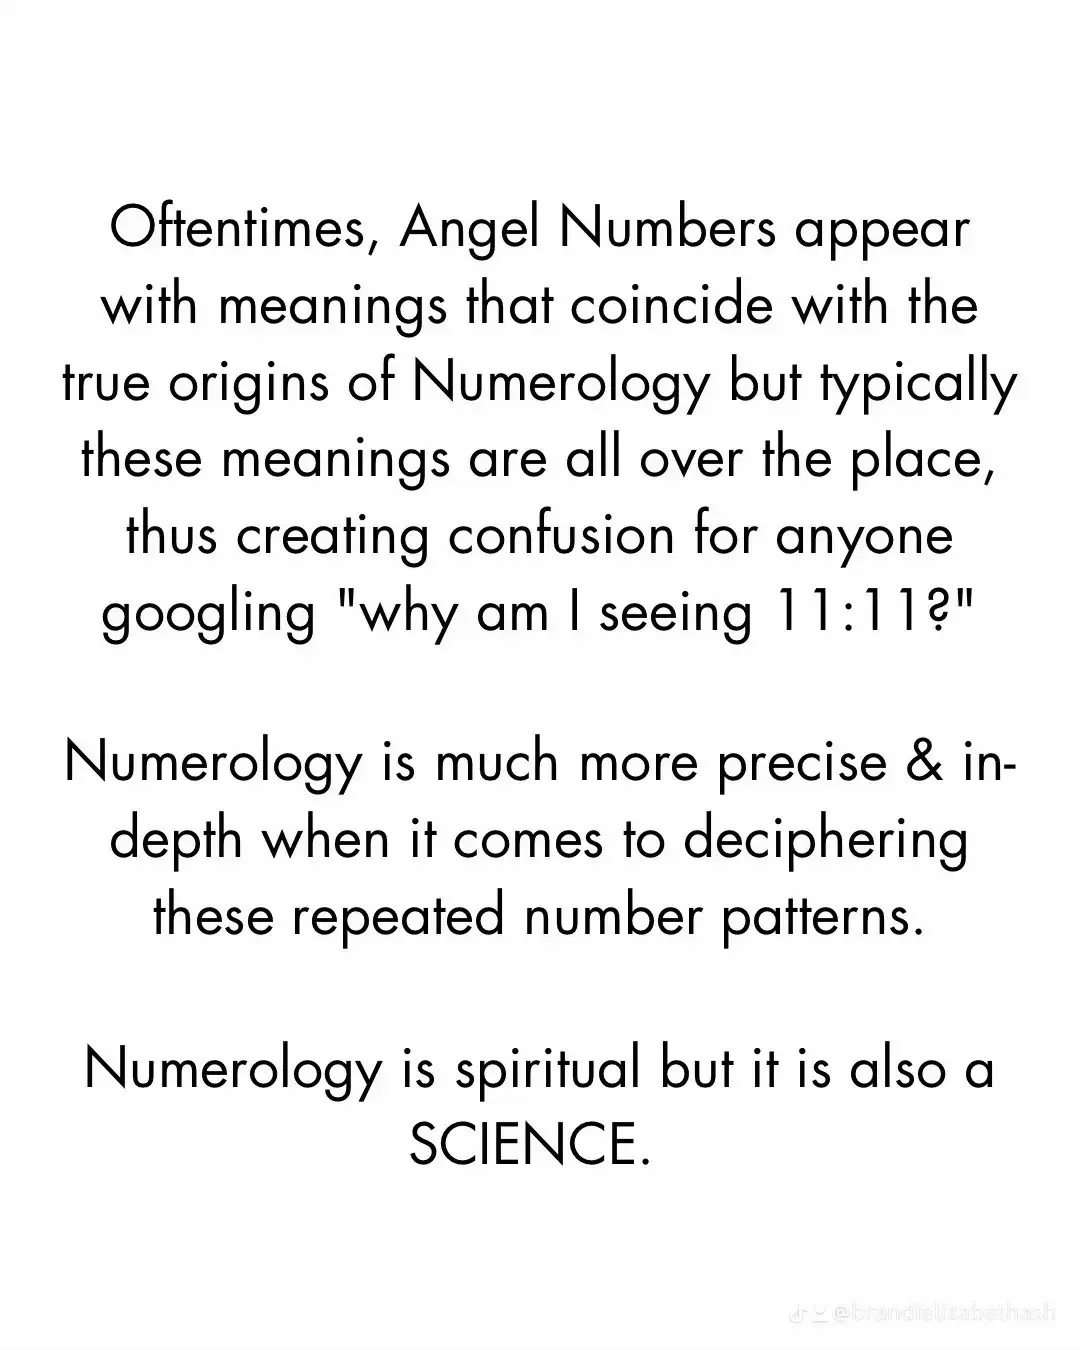  Numerology is a science that can be understood through repetition and pattern.